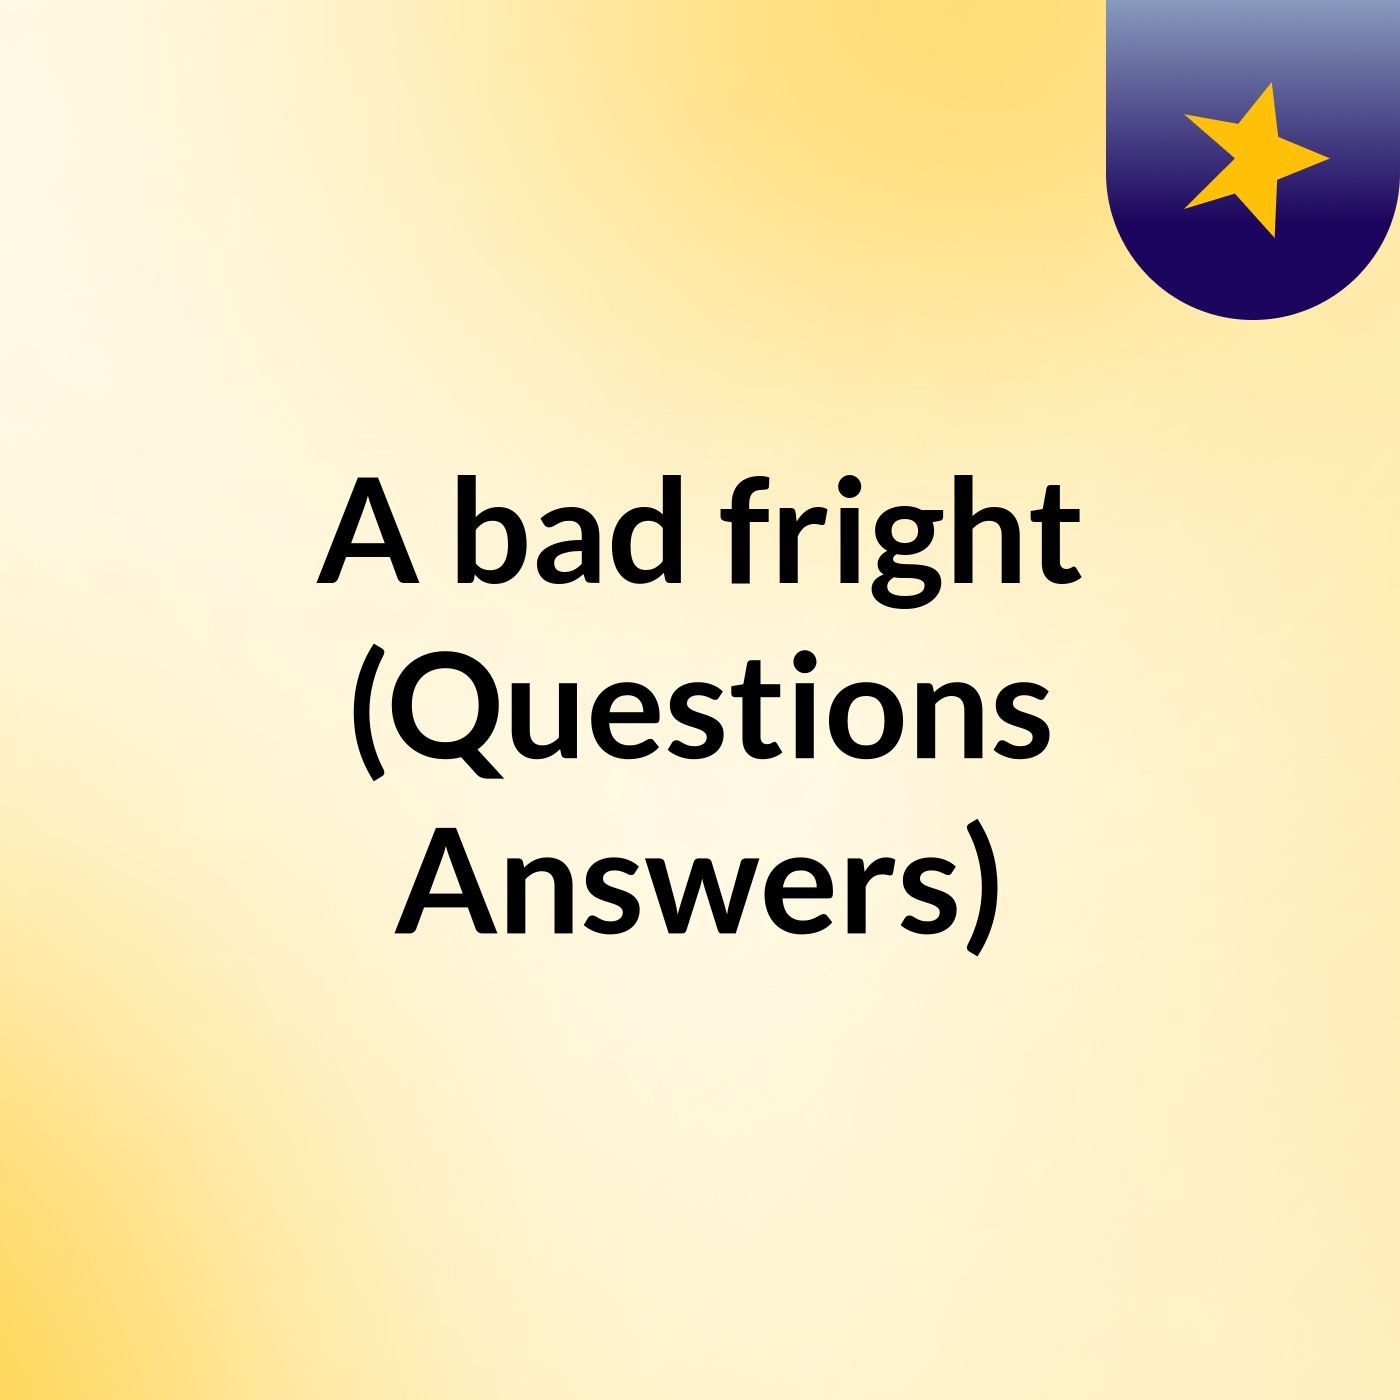 A bad fright (Questions & Answers)